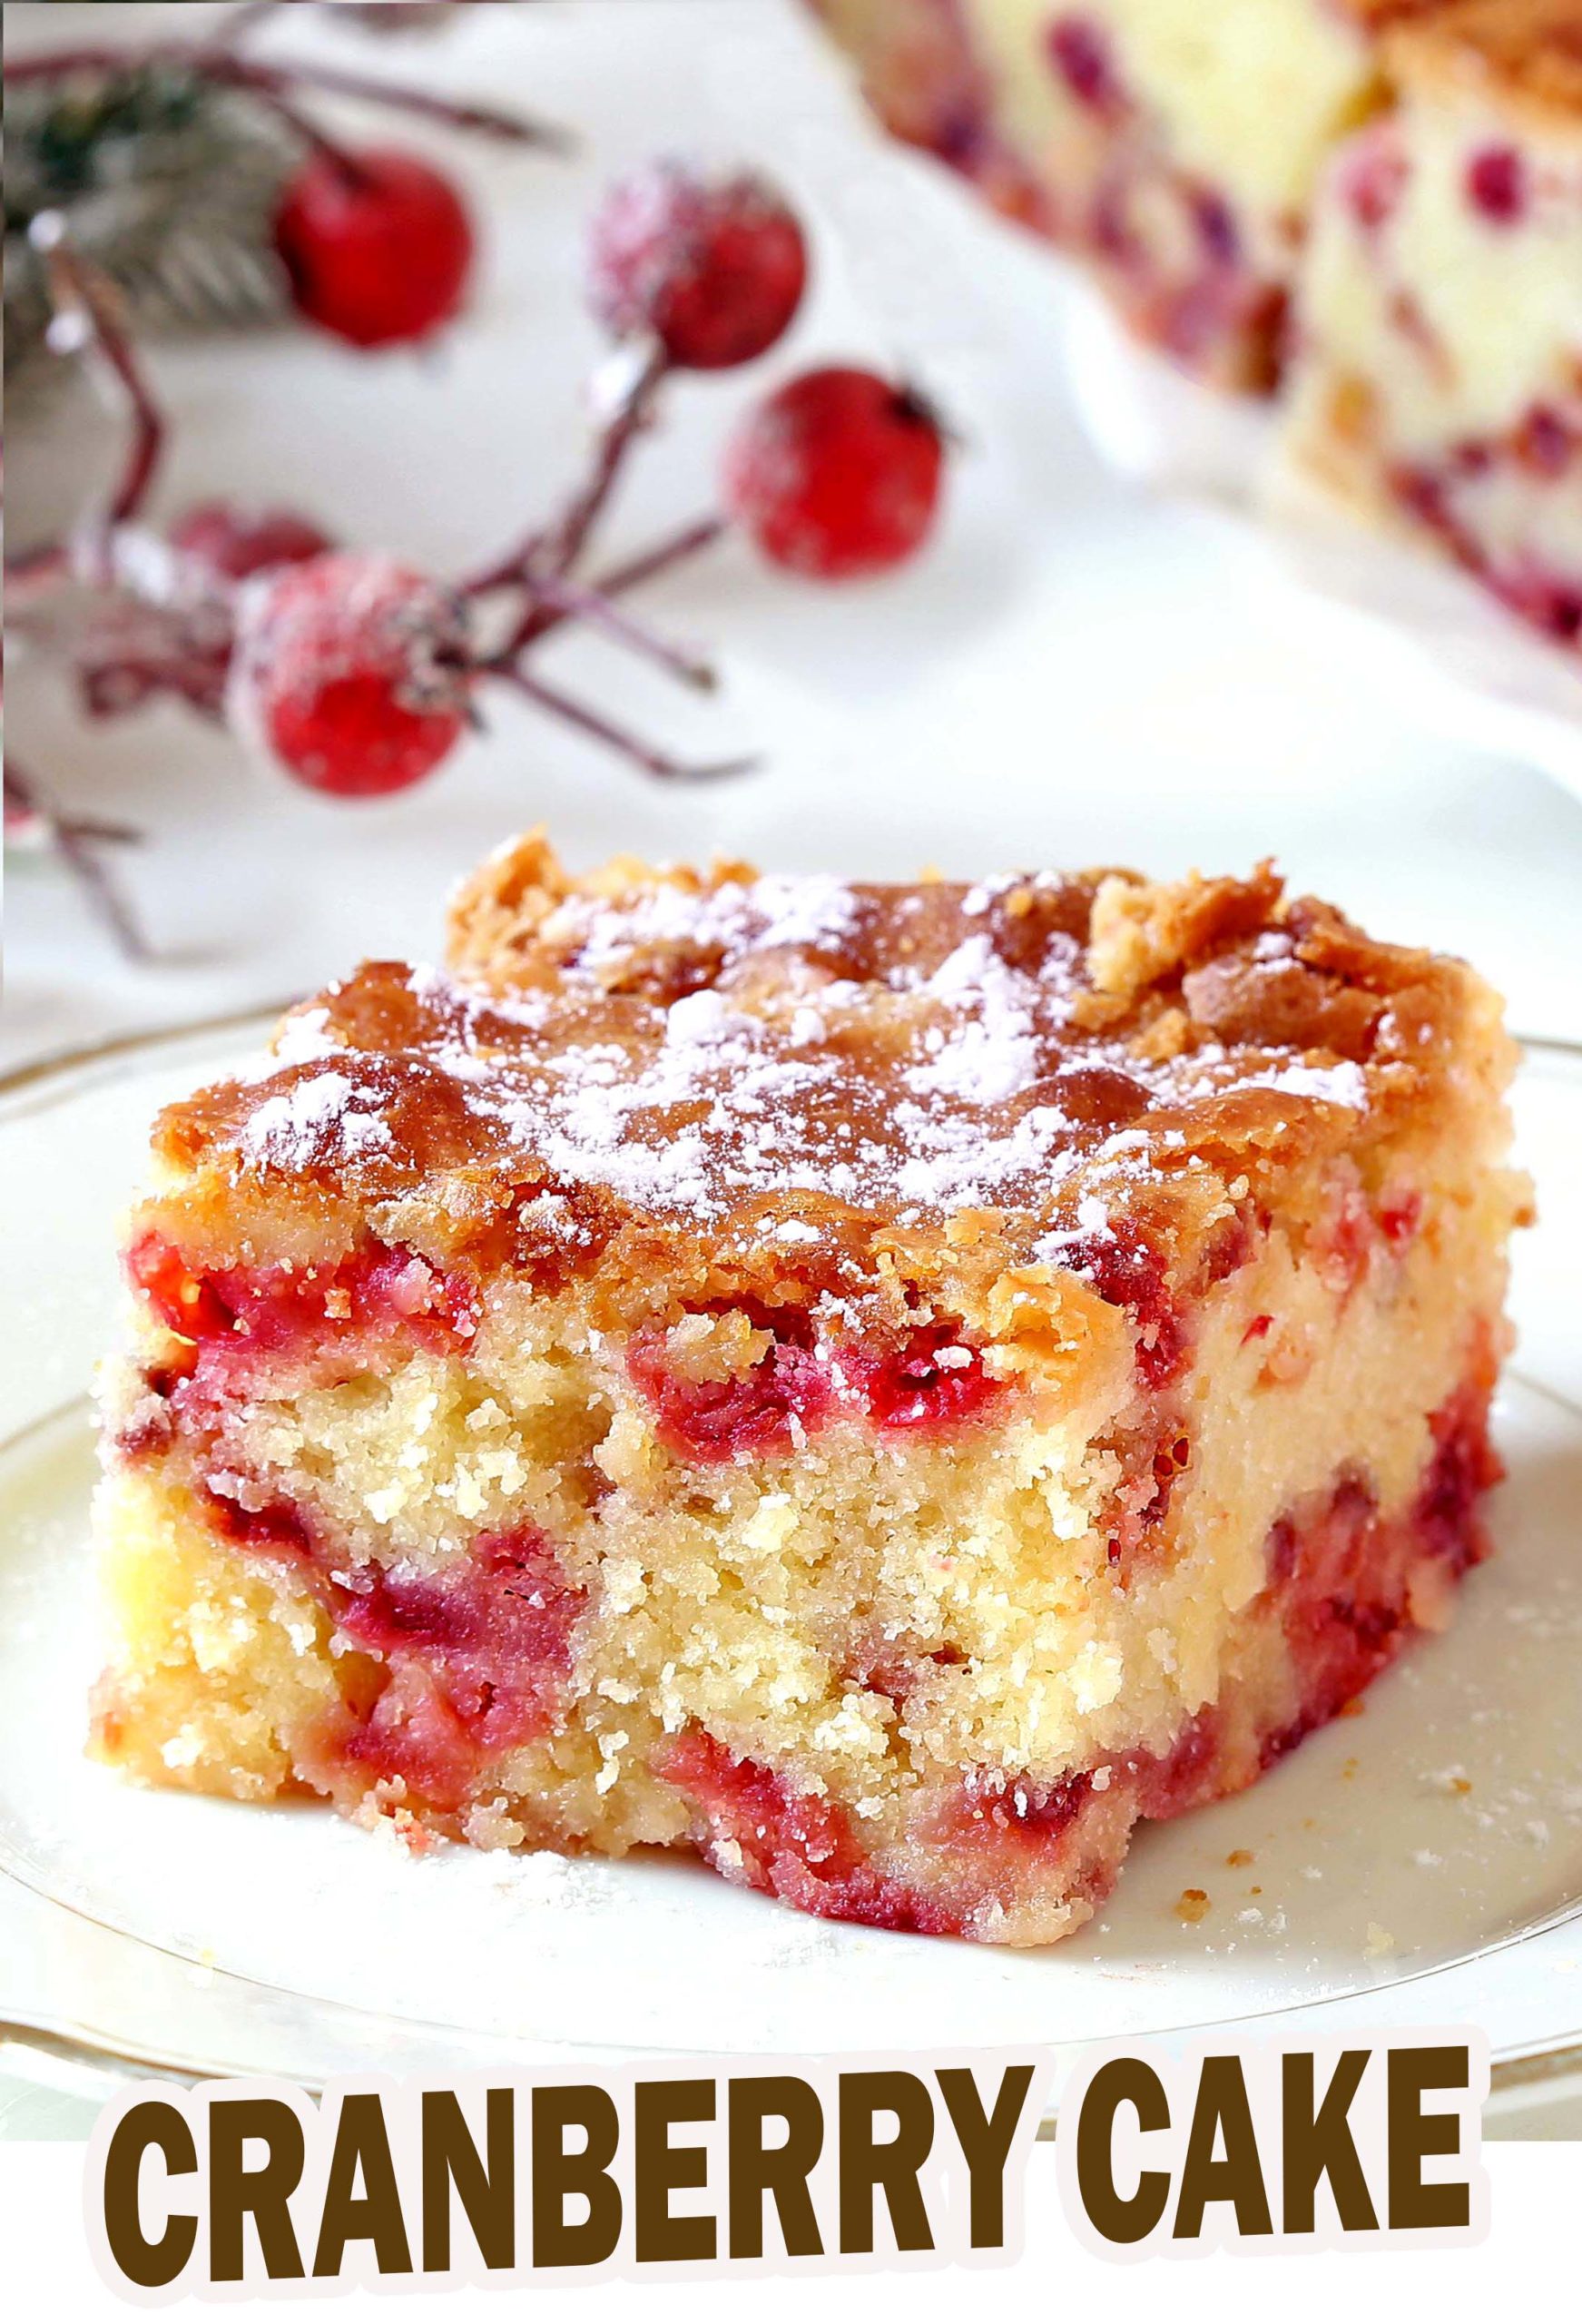 Easy Cranberry Cake - Moist, dense with a nice balance of sweetness and tartness in every bite, is a perfect dessert for Christmas. It’s also seriously easy: one bowl, 10 minutes of mixing and just pop it in the oven.